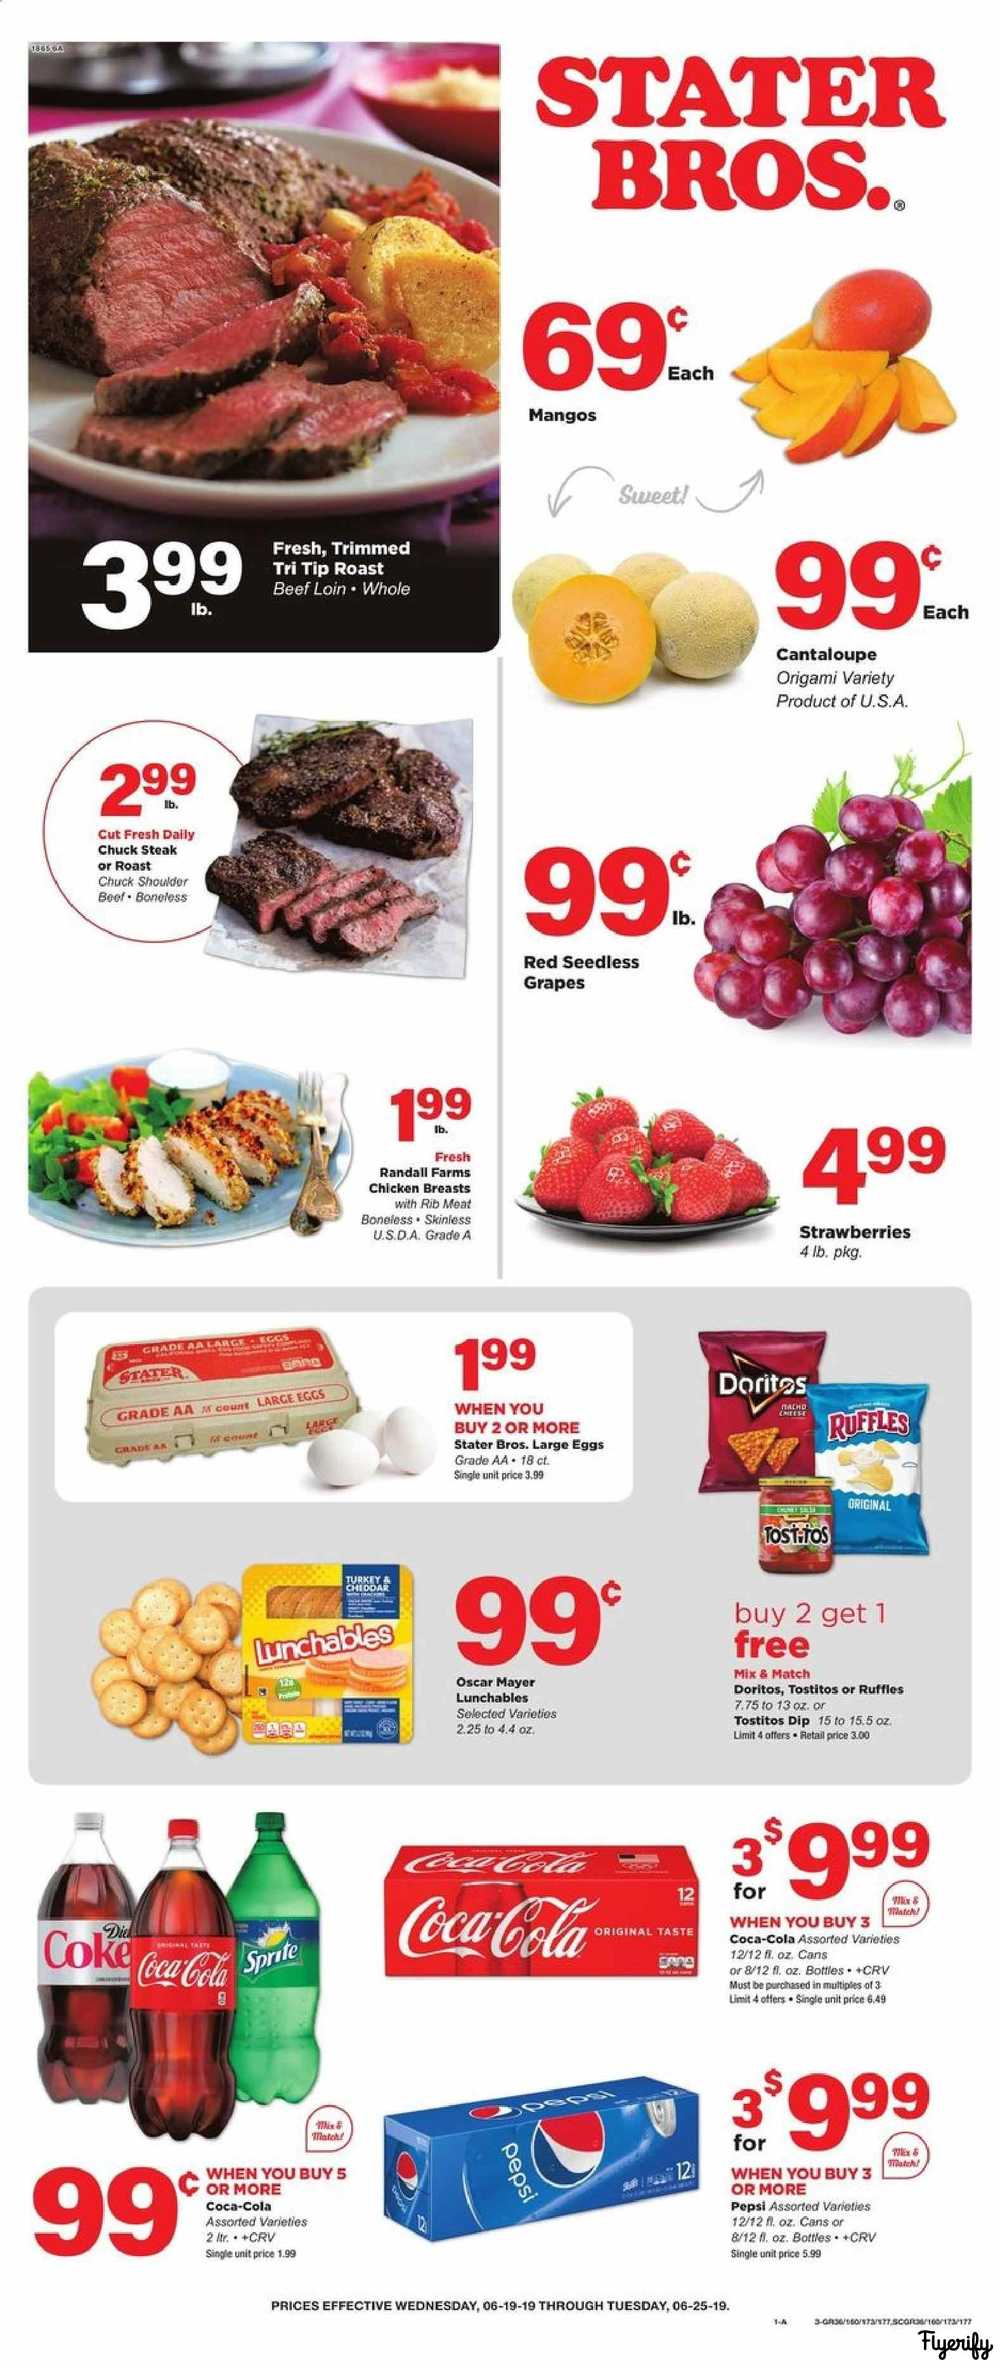 Stater brothers ad neonpikol